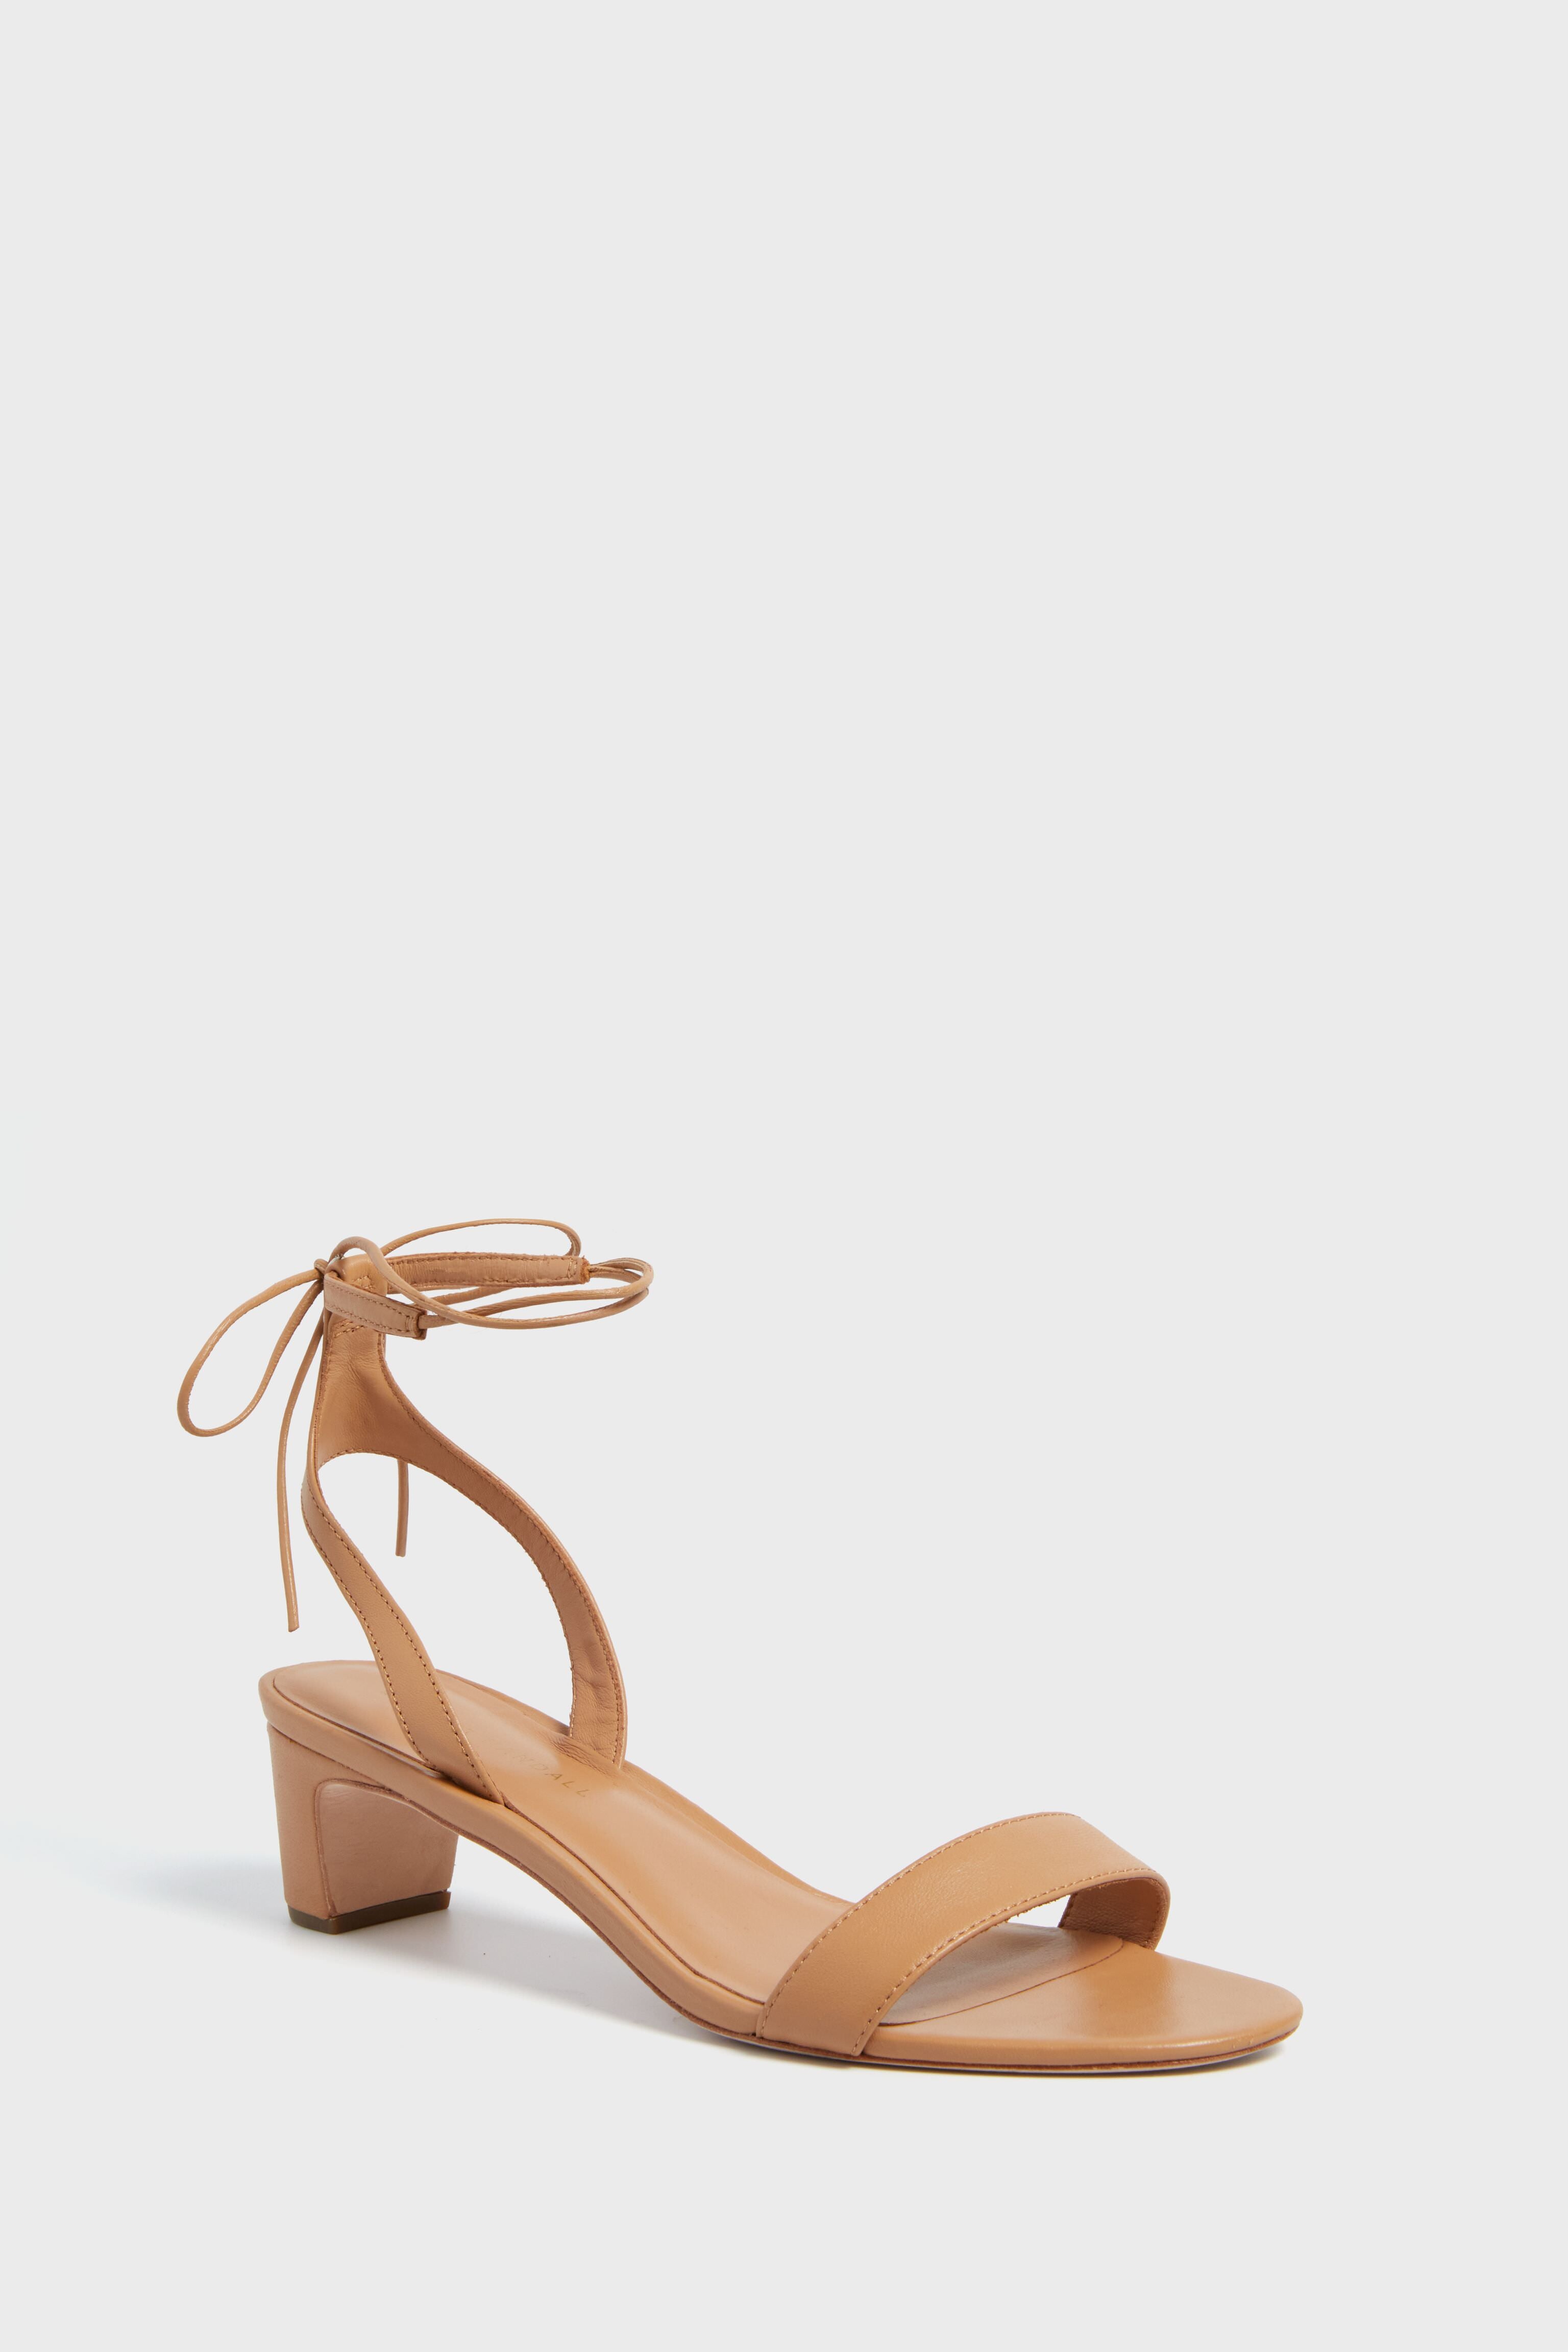 Luxurious suede mid heel sandals with fun zipper tassels, perfect for  summer parties | Sapatos, Ankle boots, Sapatos sandálias